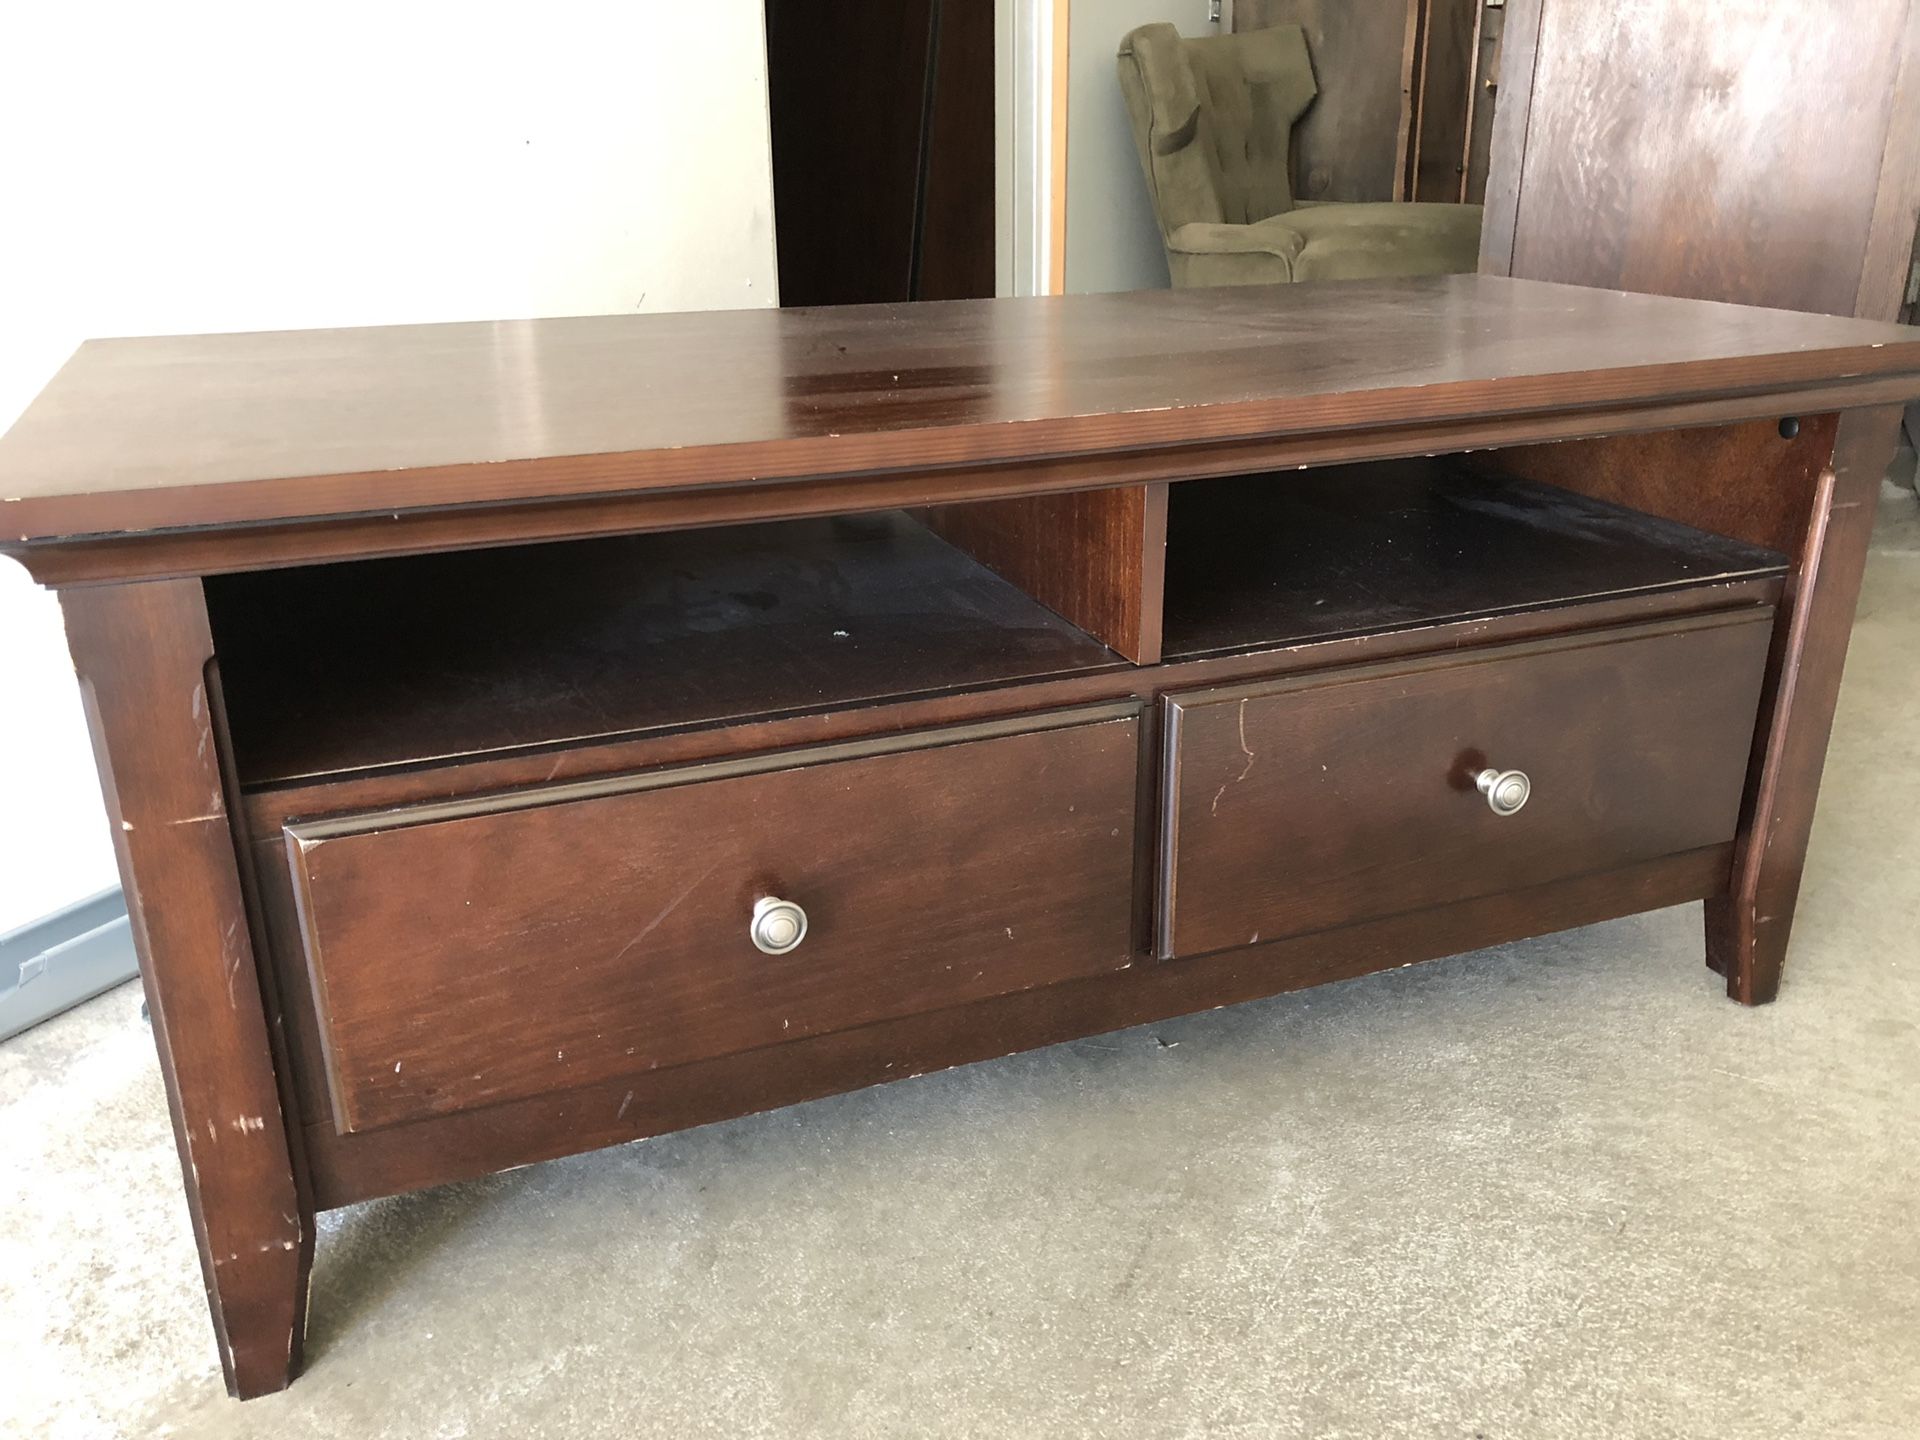 TV /entertainment stand. Both drawers on bottom work great.